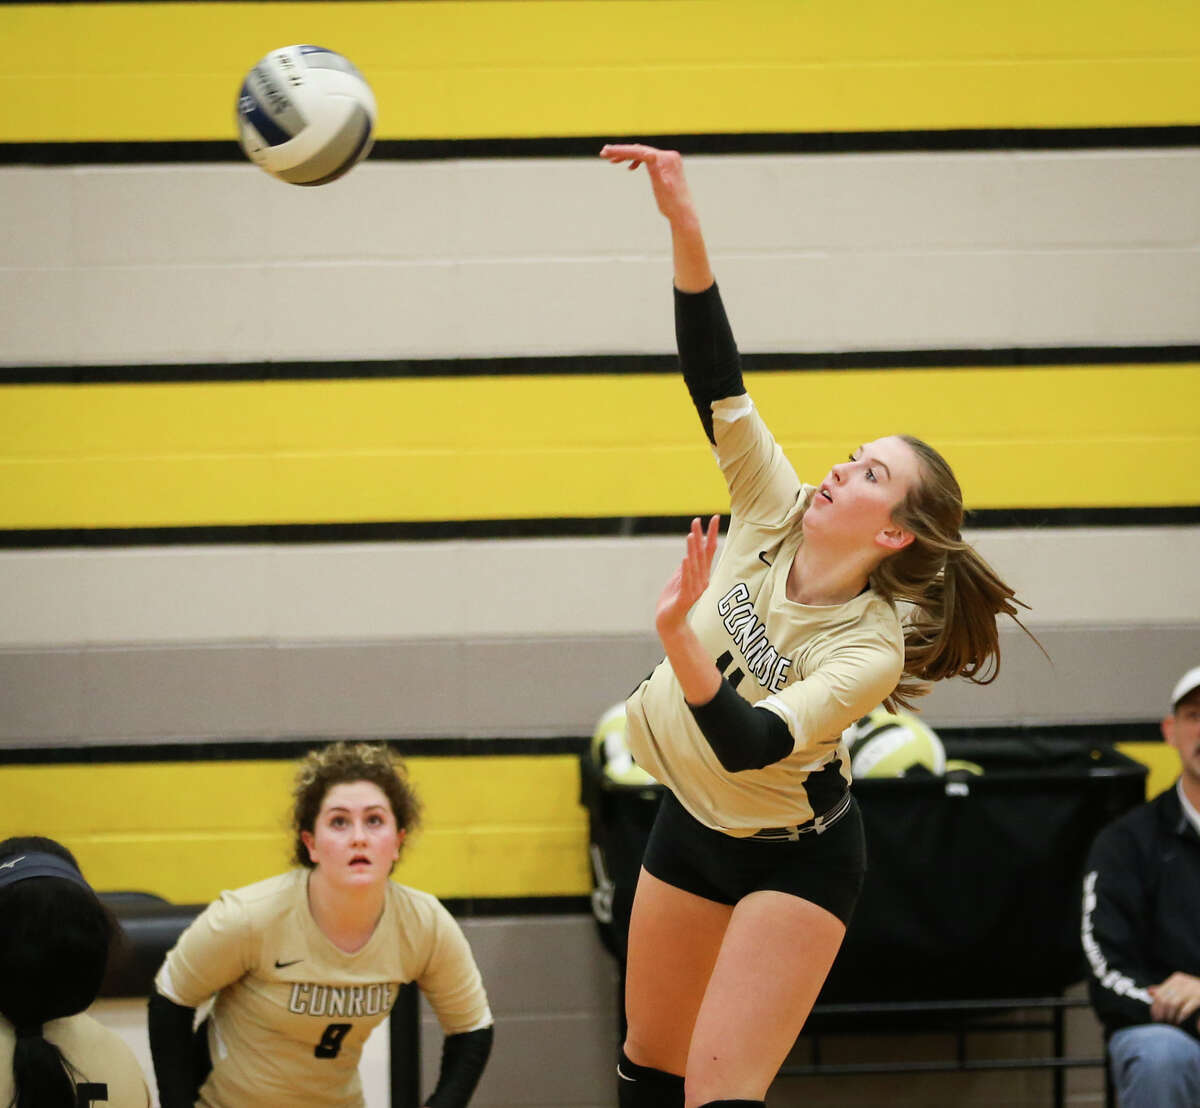 Conroe's Brooke Bartlett (11) hits the ball during the varsity volleyball game against Huffman Hargrave on Tuesday, Sept. 12, 2017, at Conroe High School. (Michael Minasi/ Chronicle)